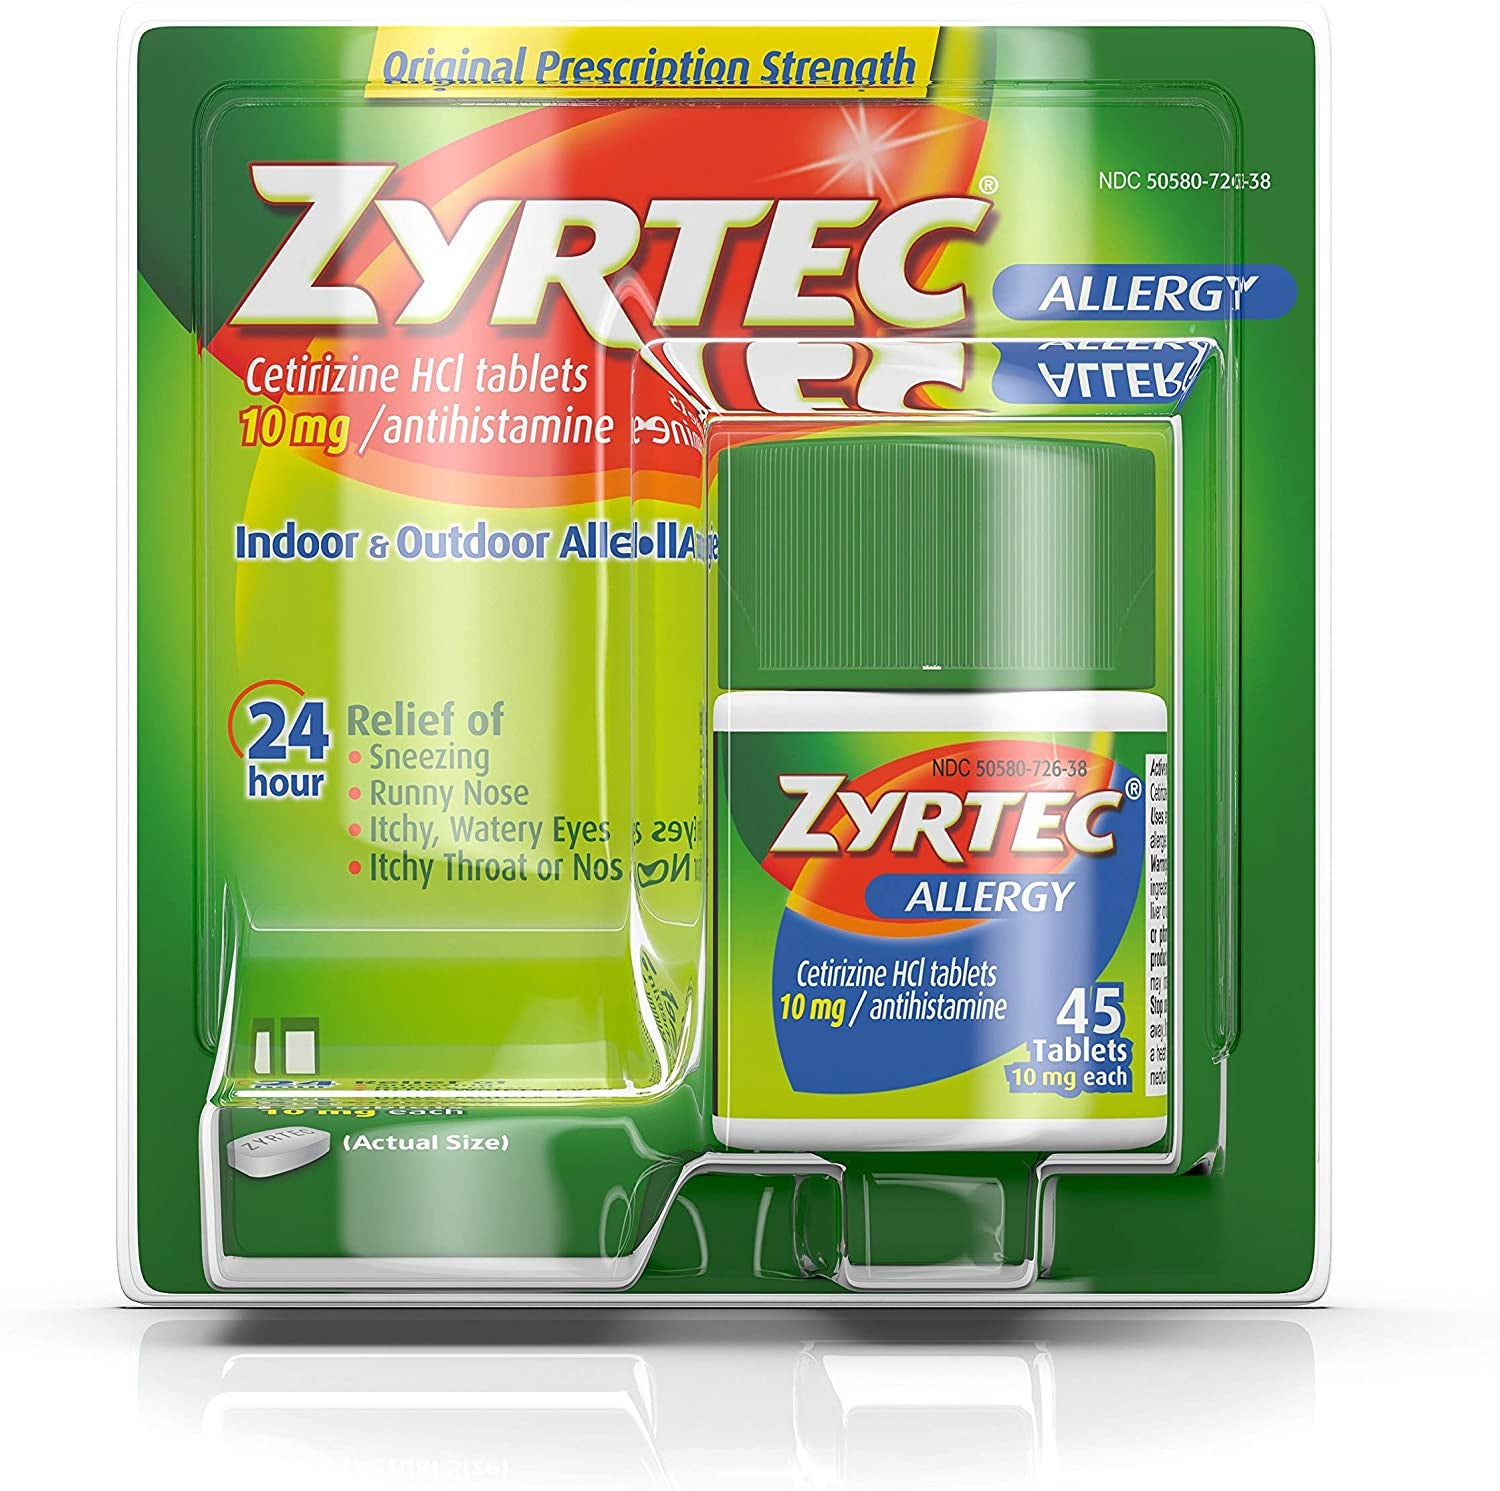 Zyrtec Allergy 10MG Tablets 45ct